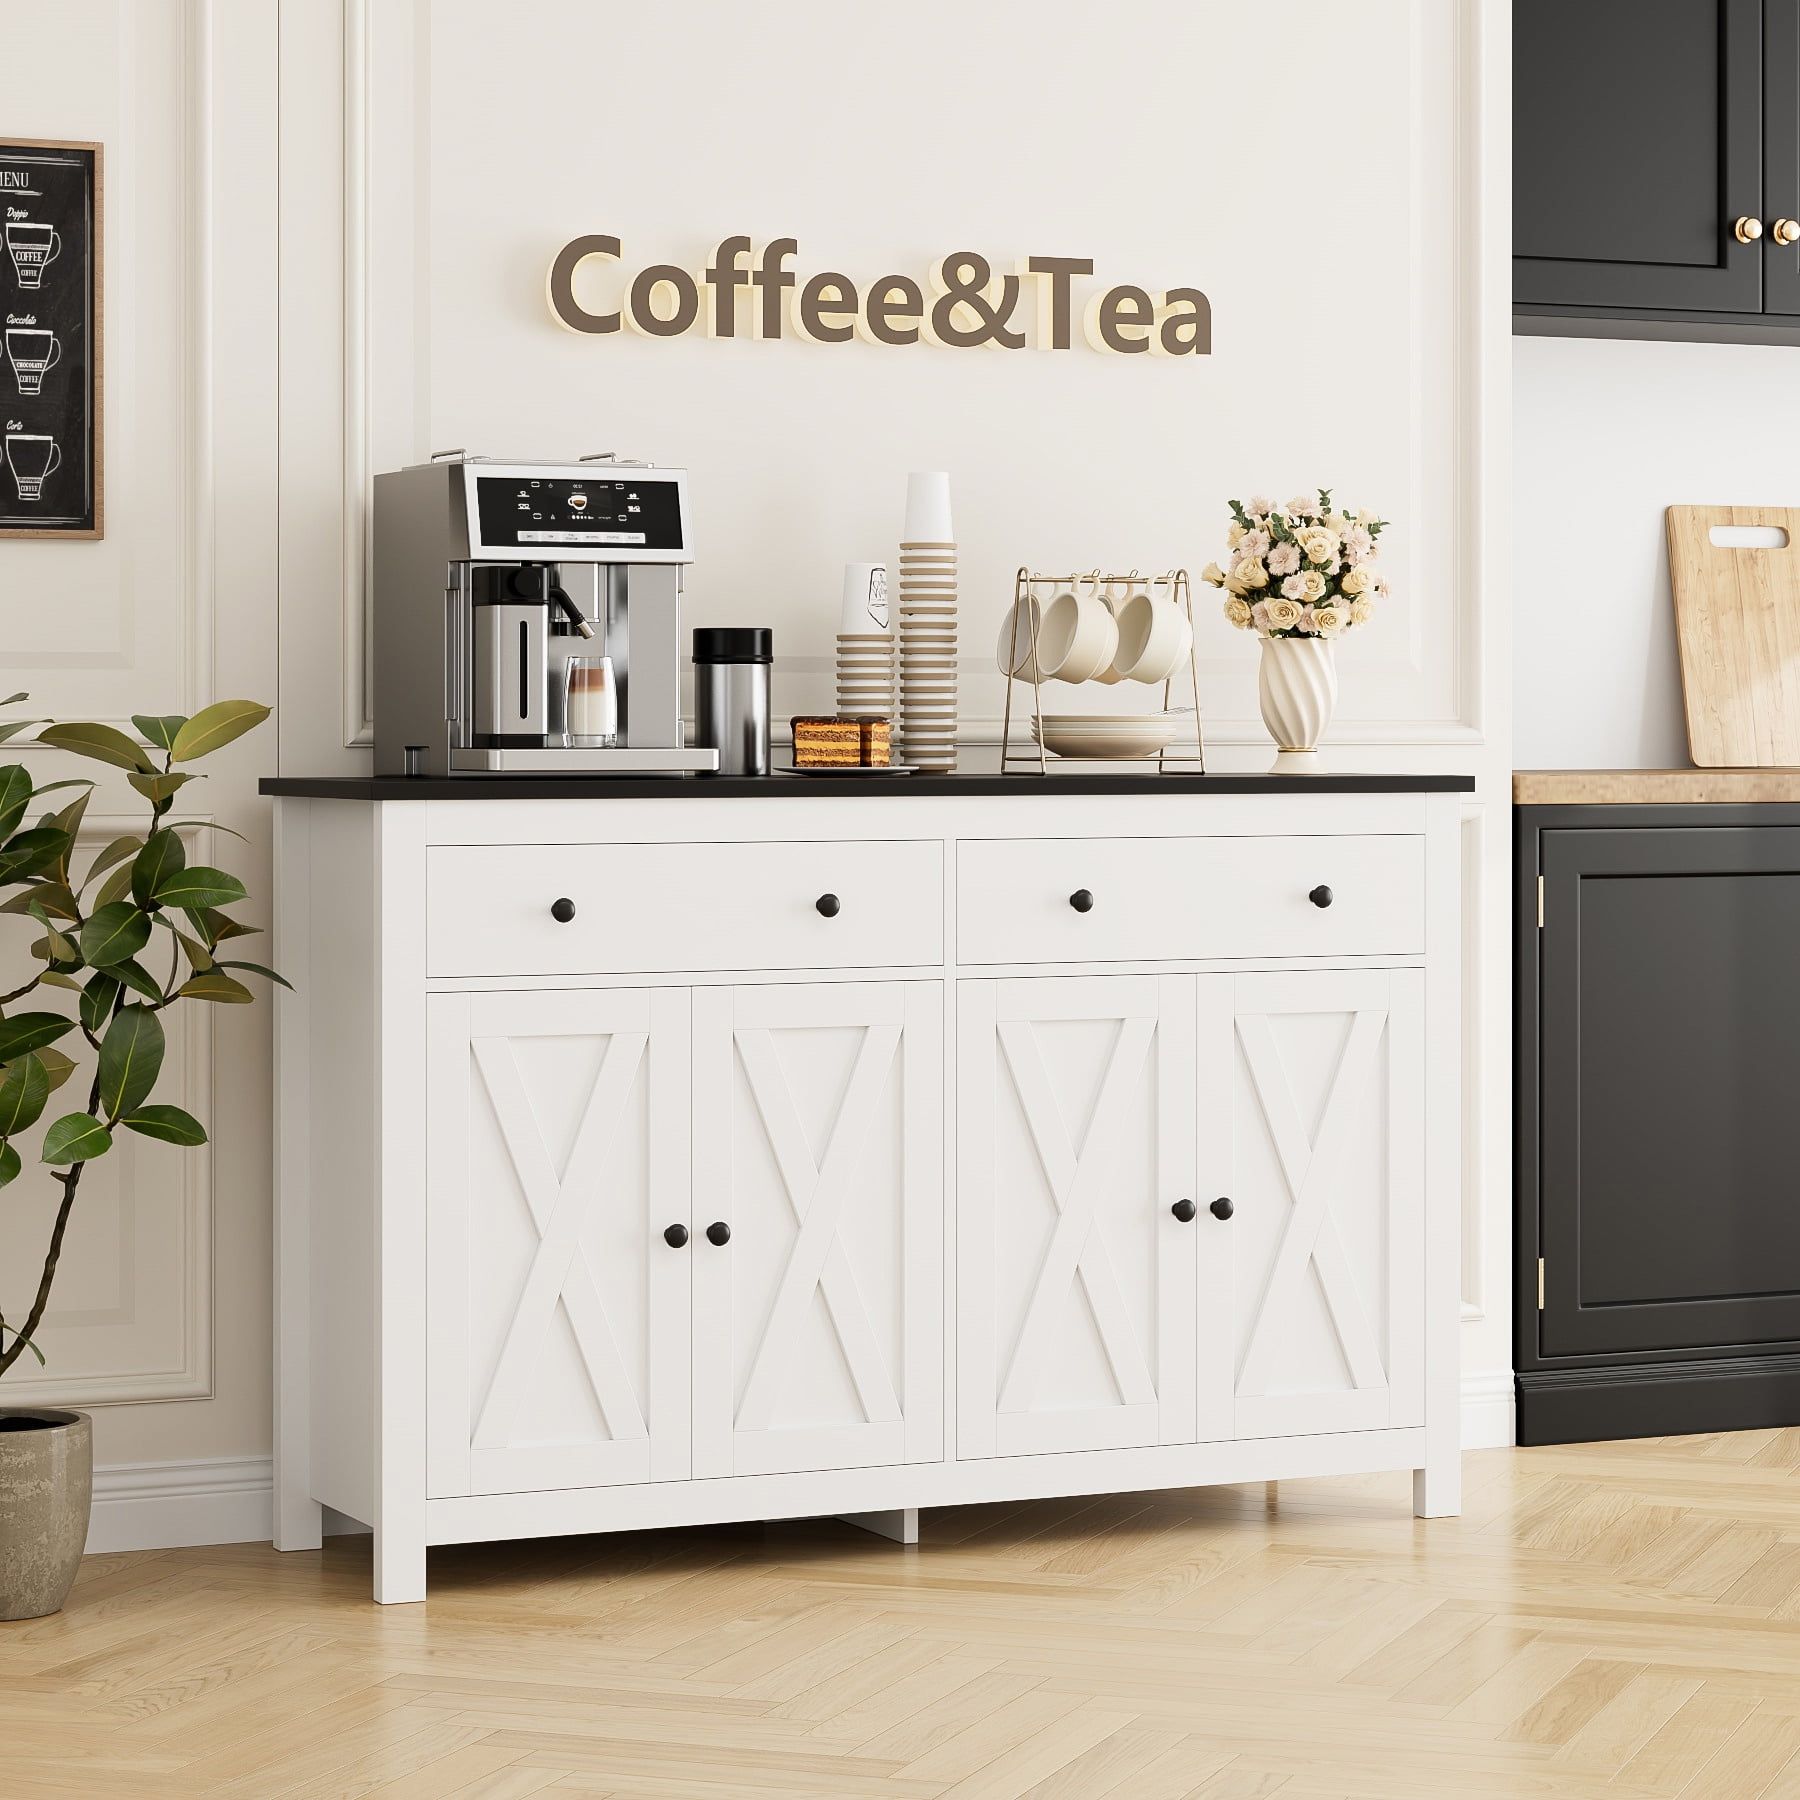 Homfa 4 Doors With 2 Drawers Farmhouse Storage Cabinet, Wood Kitchen  Sideboard With Adjustable Shelves, White Black – Walmart Inside Most Current Sideboards With Adjustable Shelves (View 4 of 15)